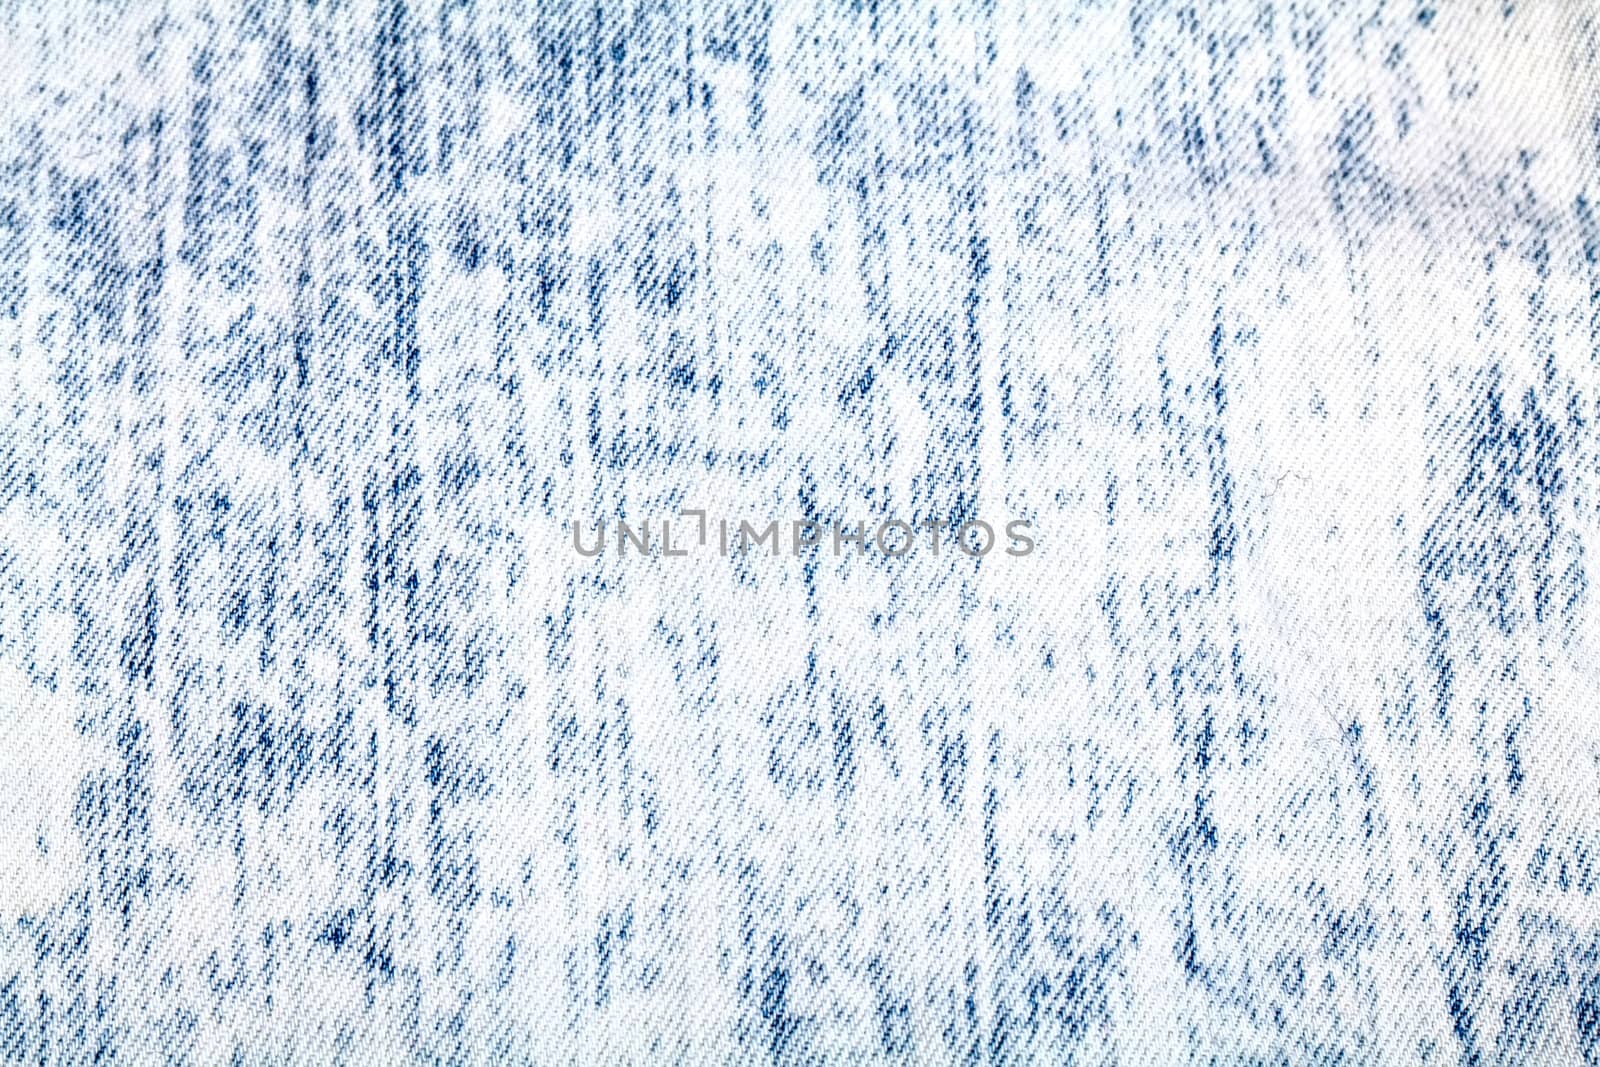 Jeans textile background  by RawGroup